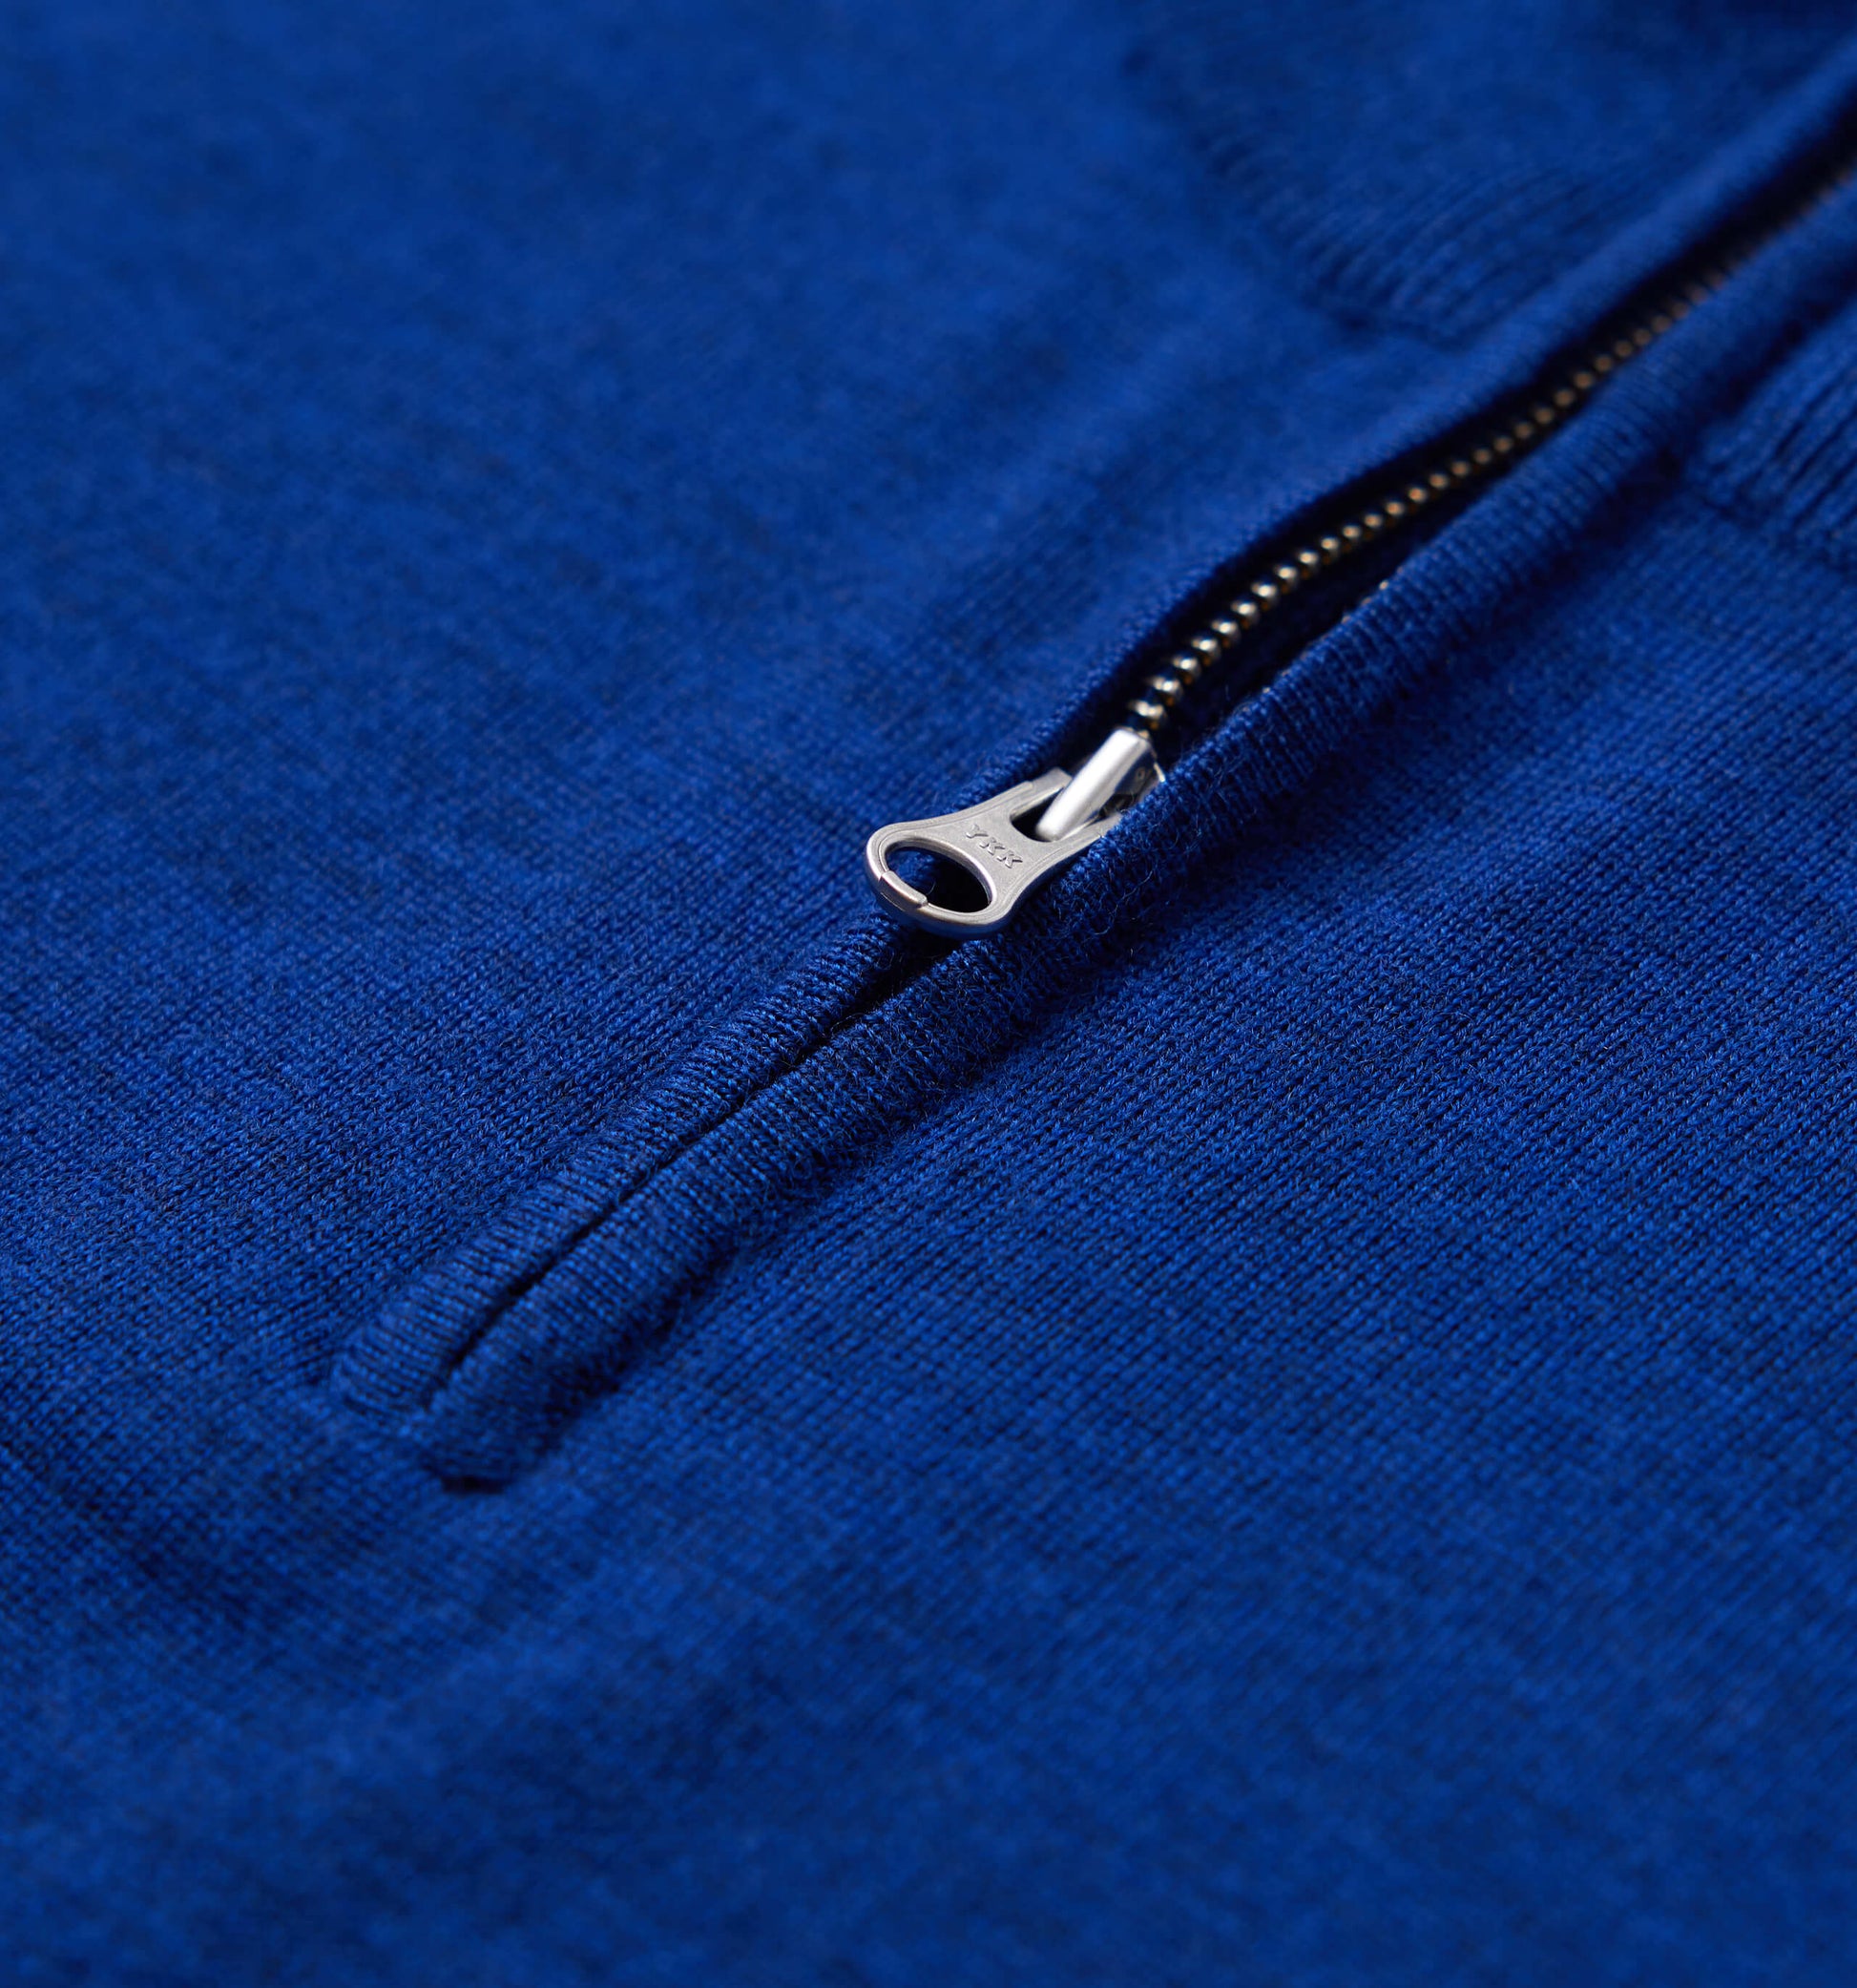 The Michael - Merino Wool Zip Mock In Royal Blue From King Essentials